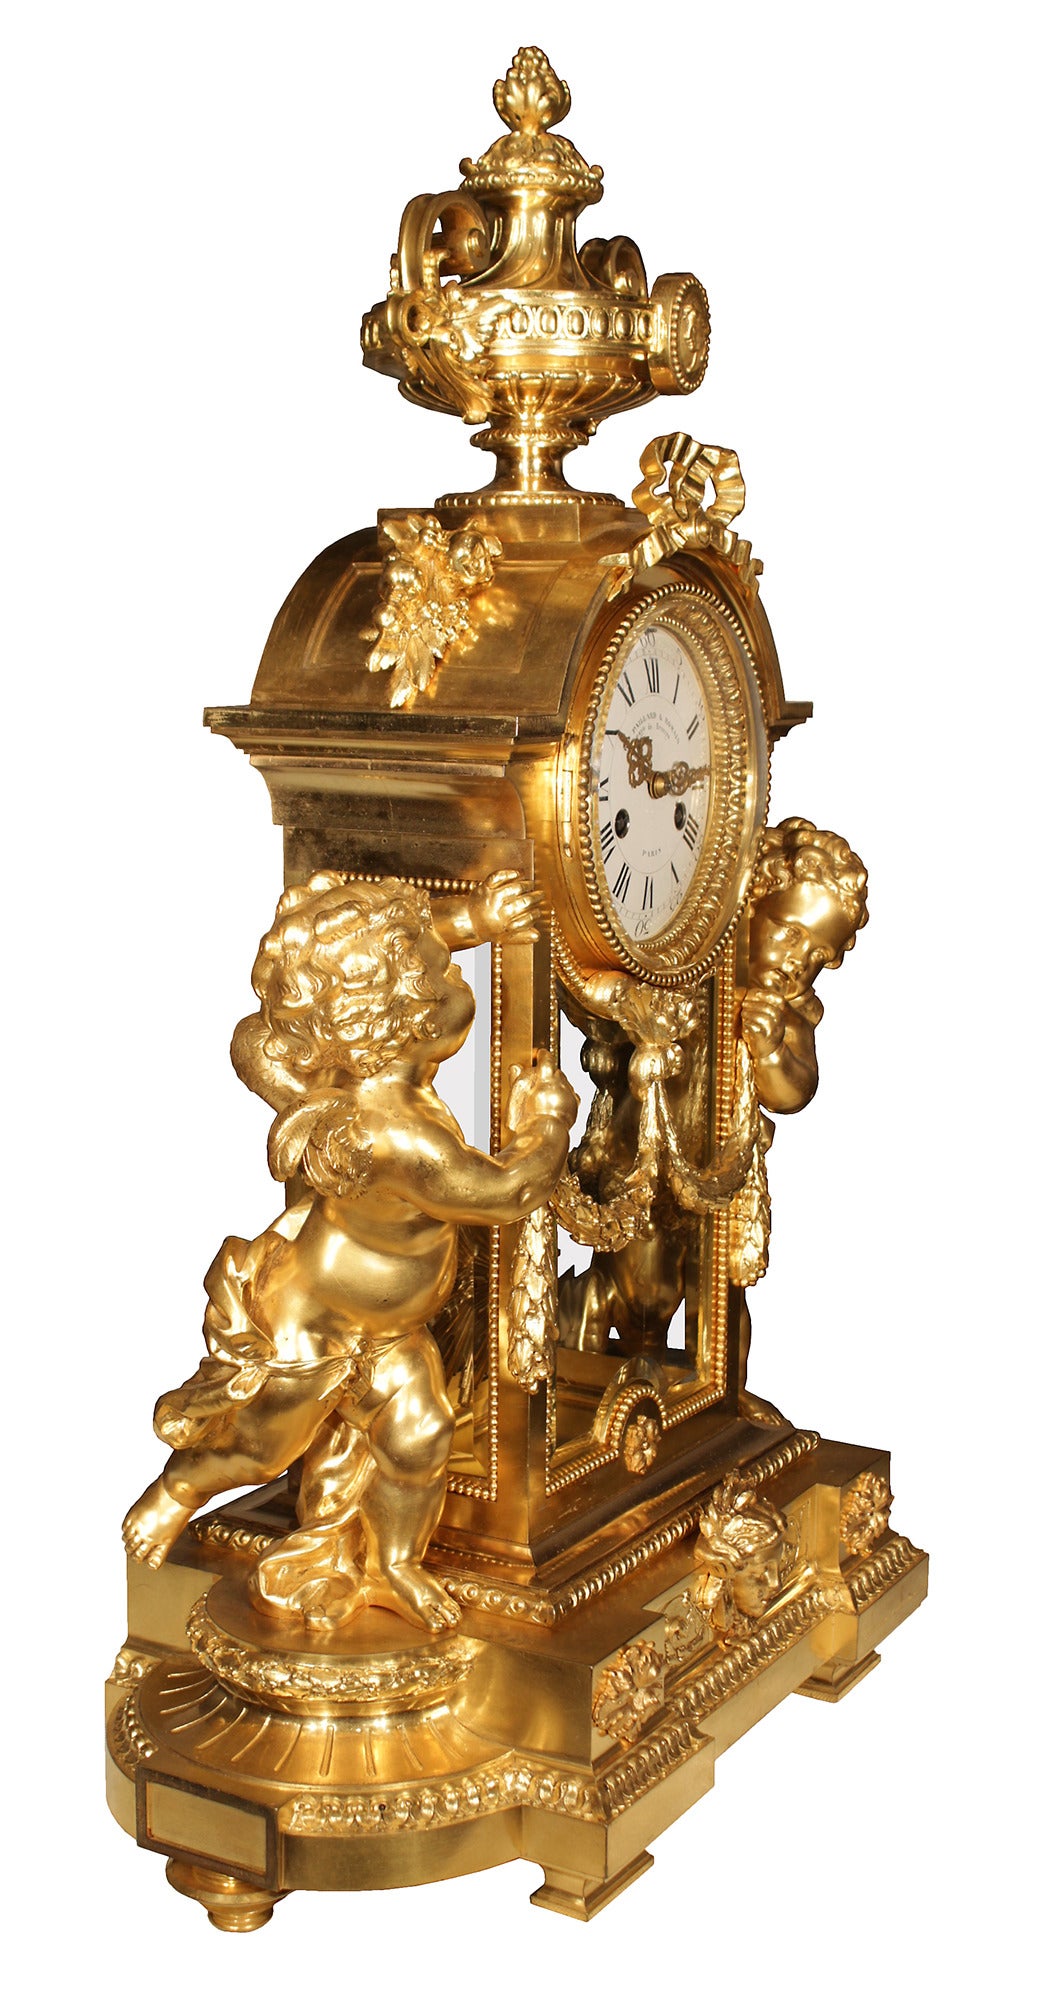 An exquisite and high quality French 19th Louis XVI style ormolu clock by Victor Paillard and Romain, fabricants de bronzes, Paris. The clock is raised on rectangular feet below an oval ormolu base decorated with a central female mask among beaded